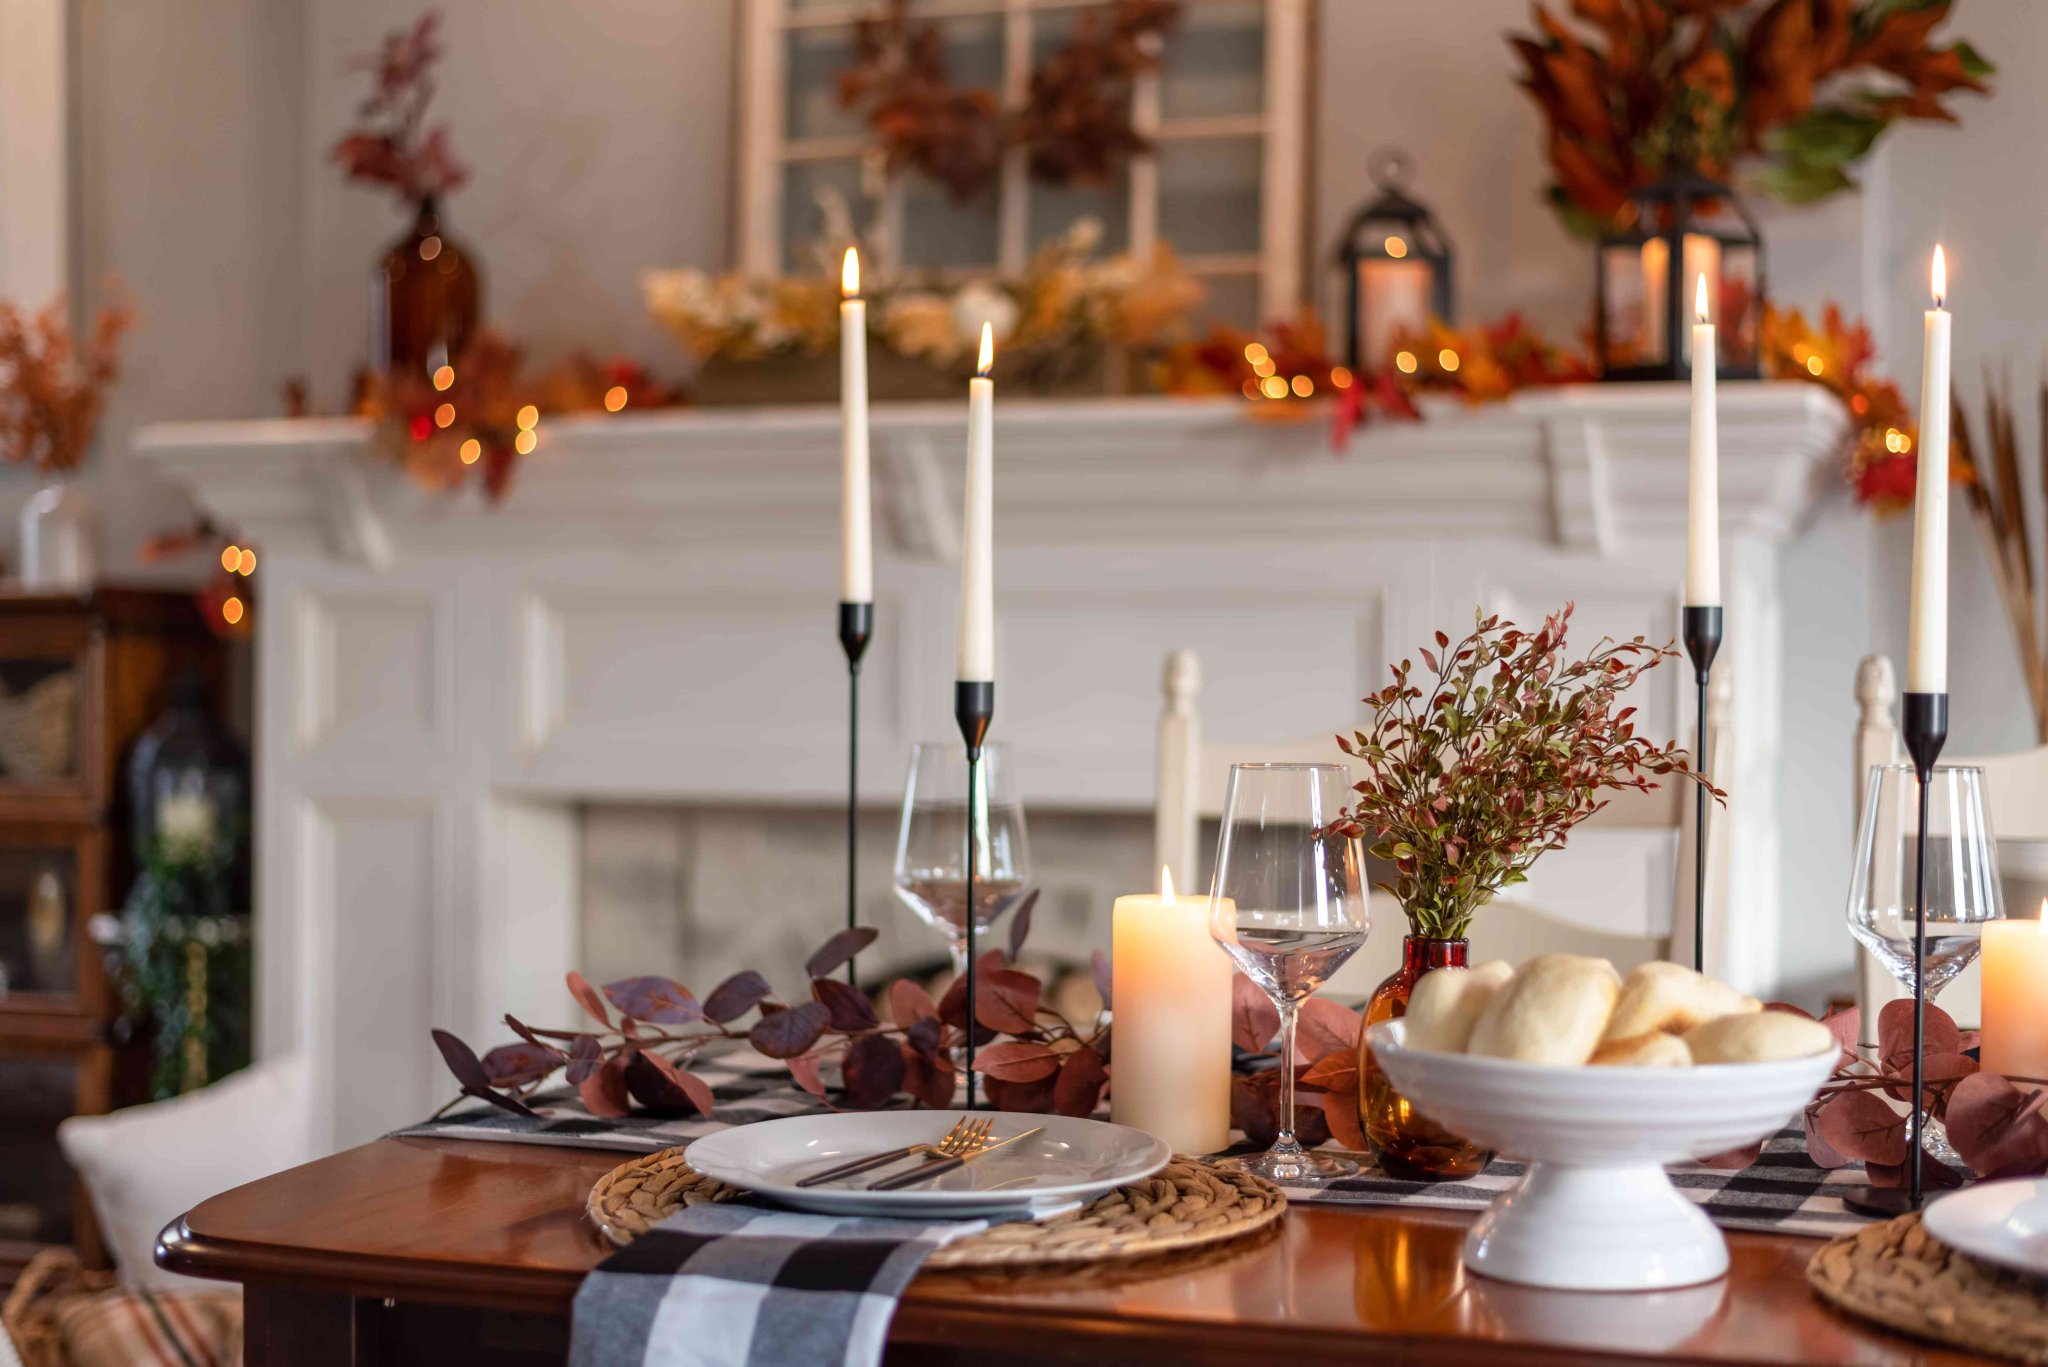 Catering to The Senses Will Upgrade Your Thanksgiving Decor, This Designer Says